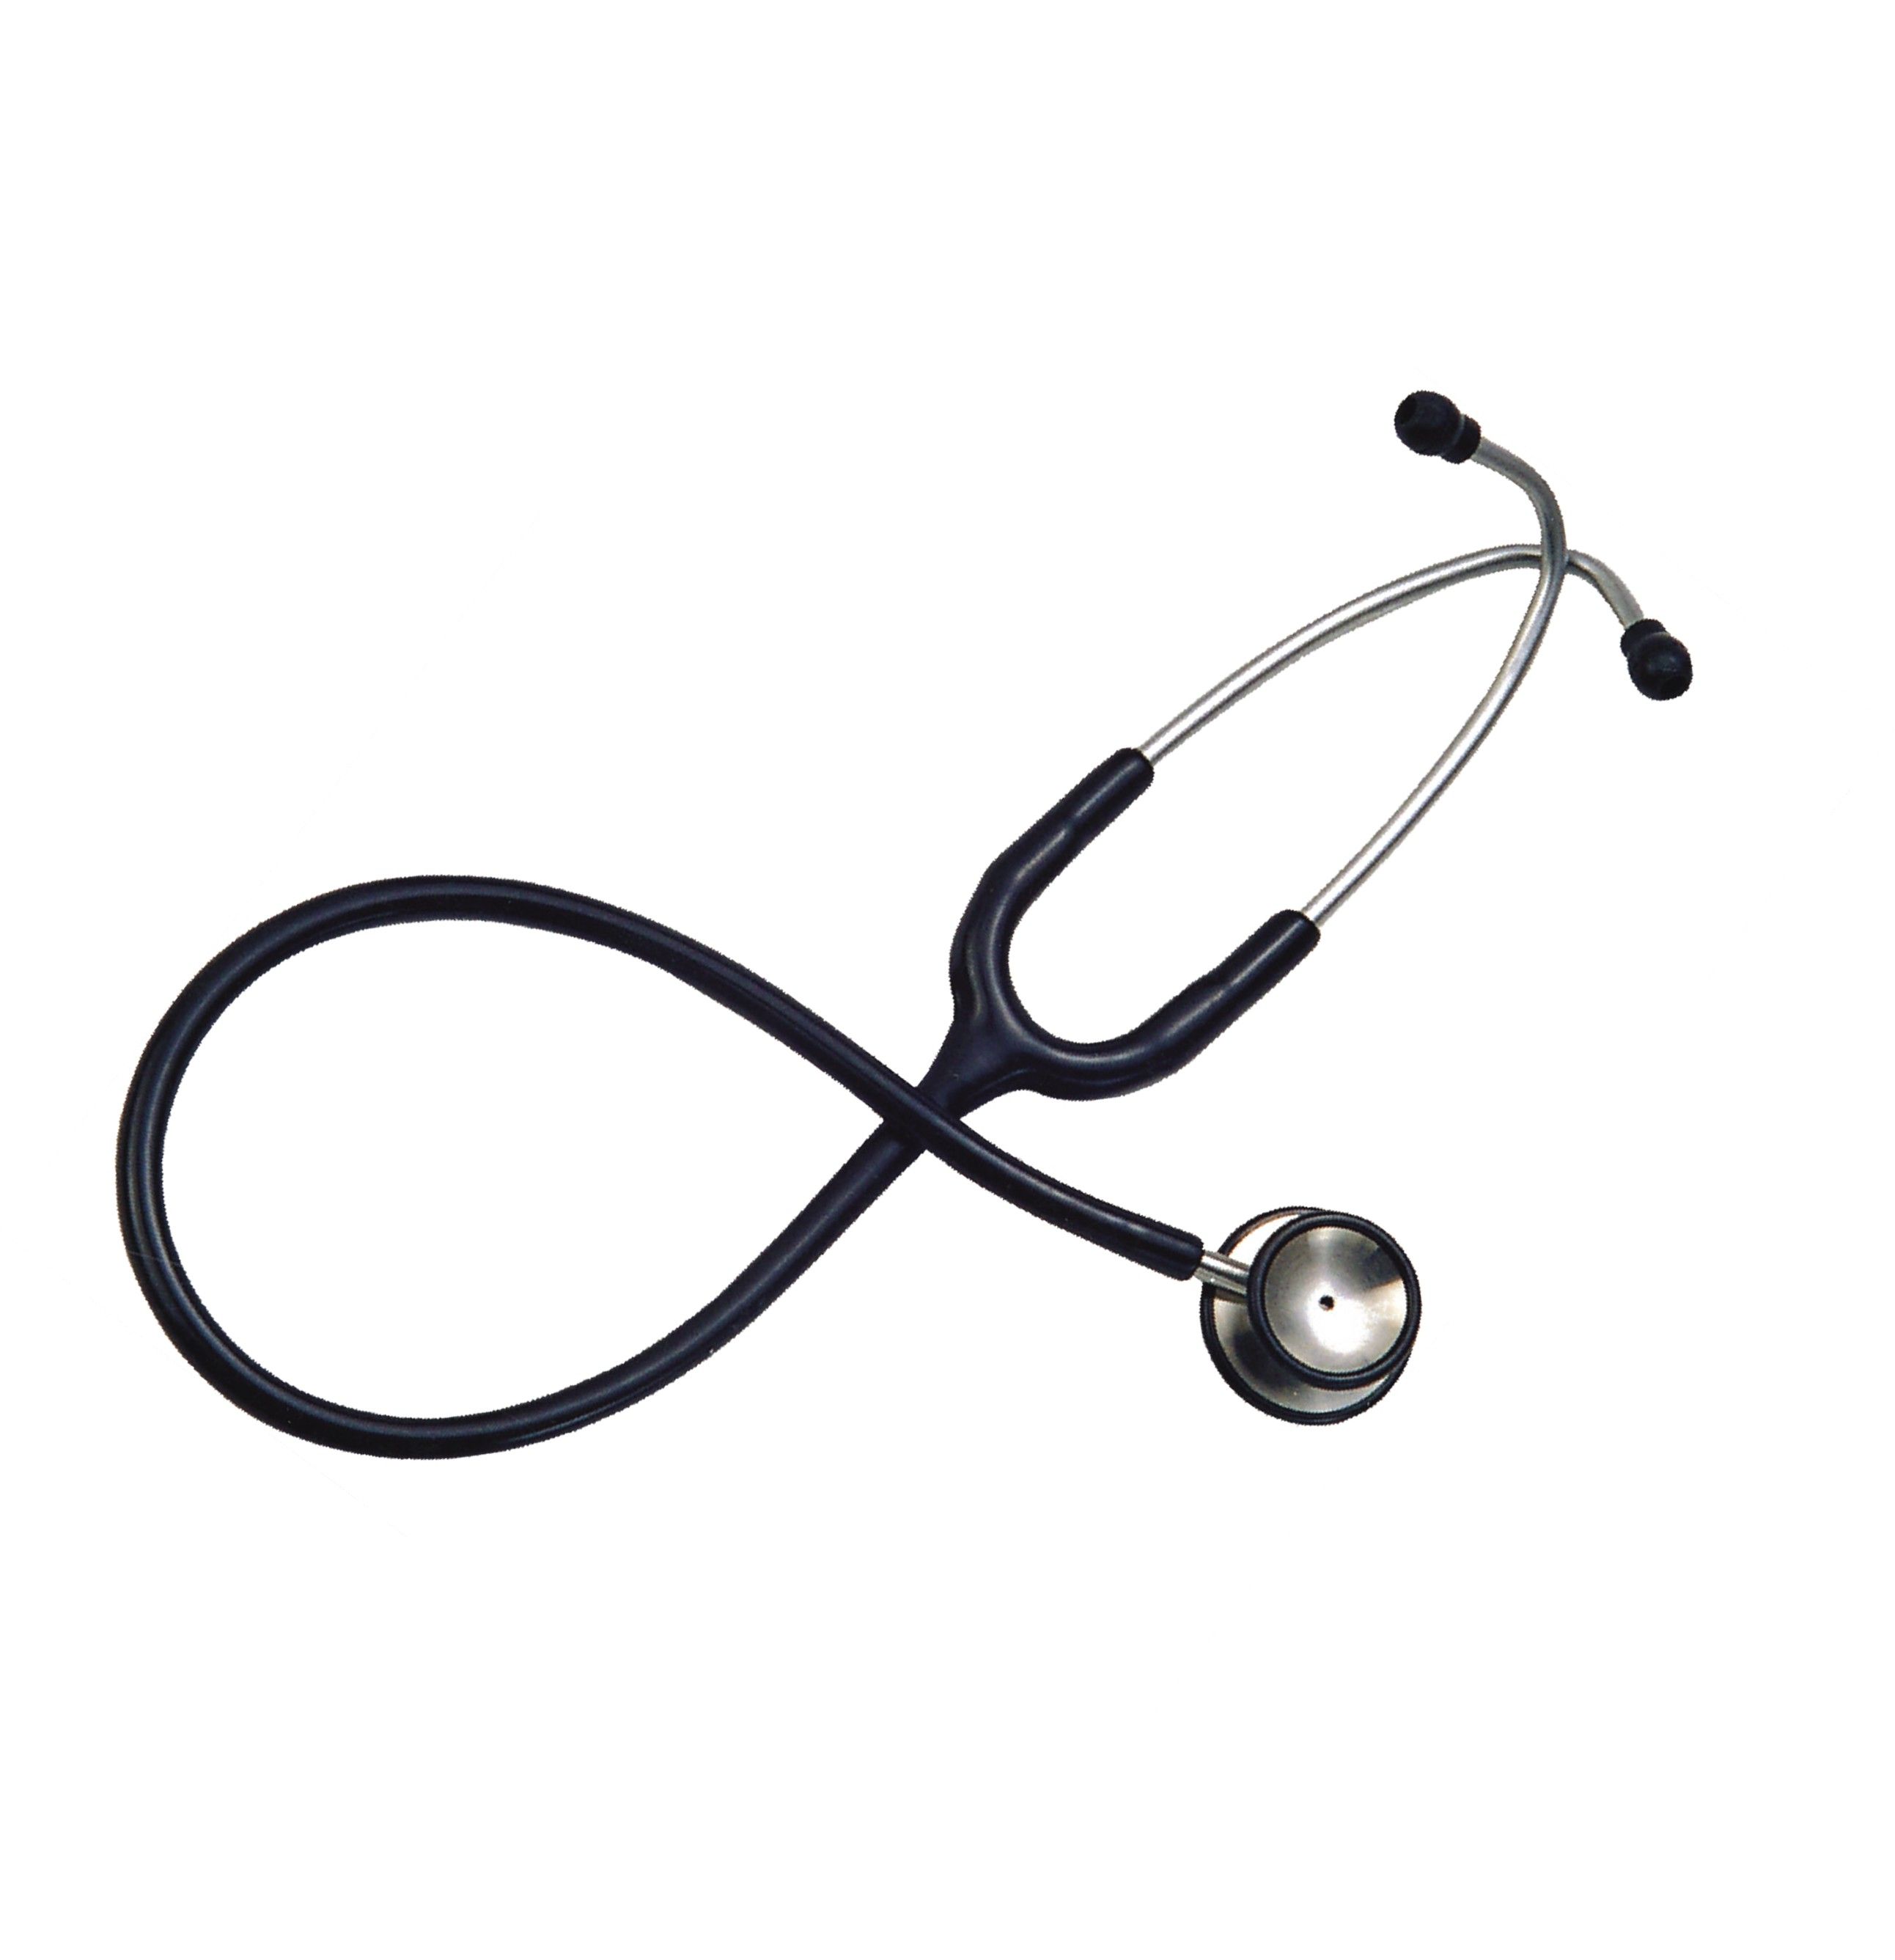 Best Stethoscope Clipart